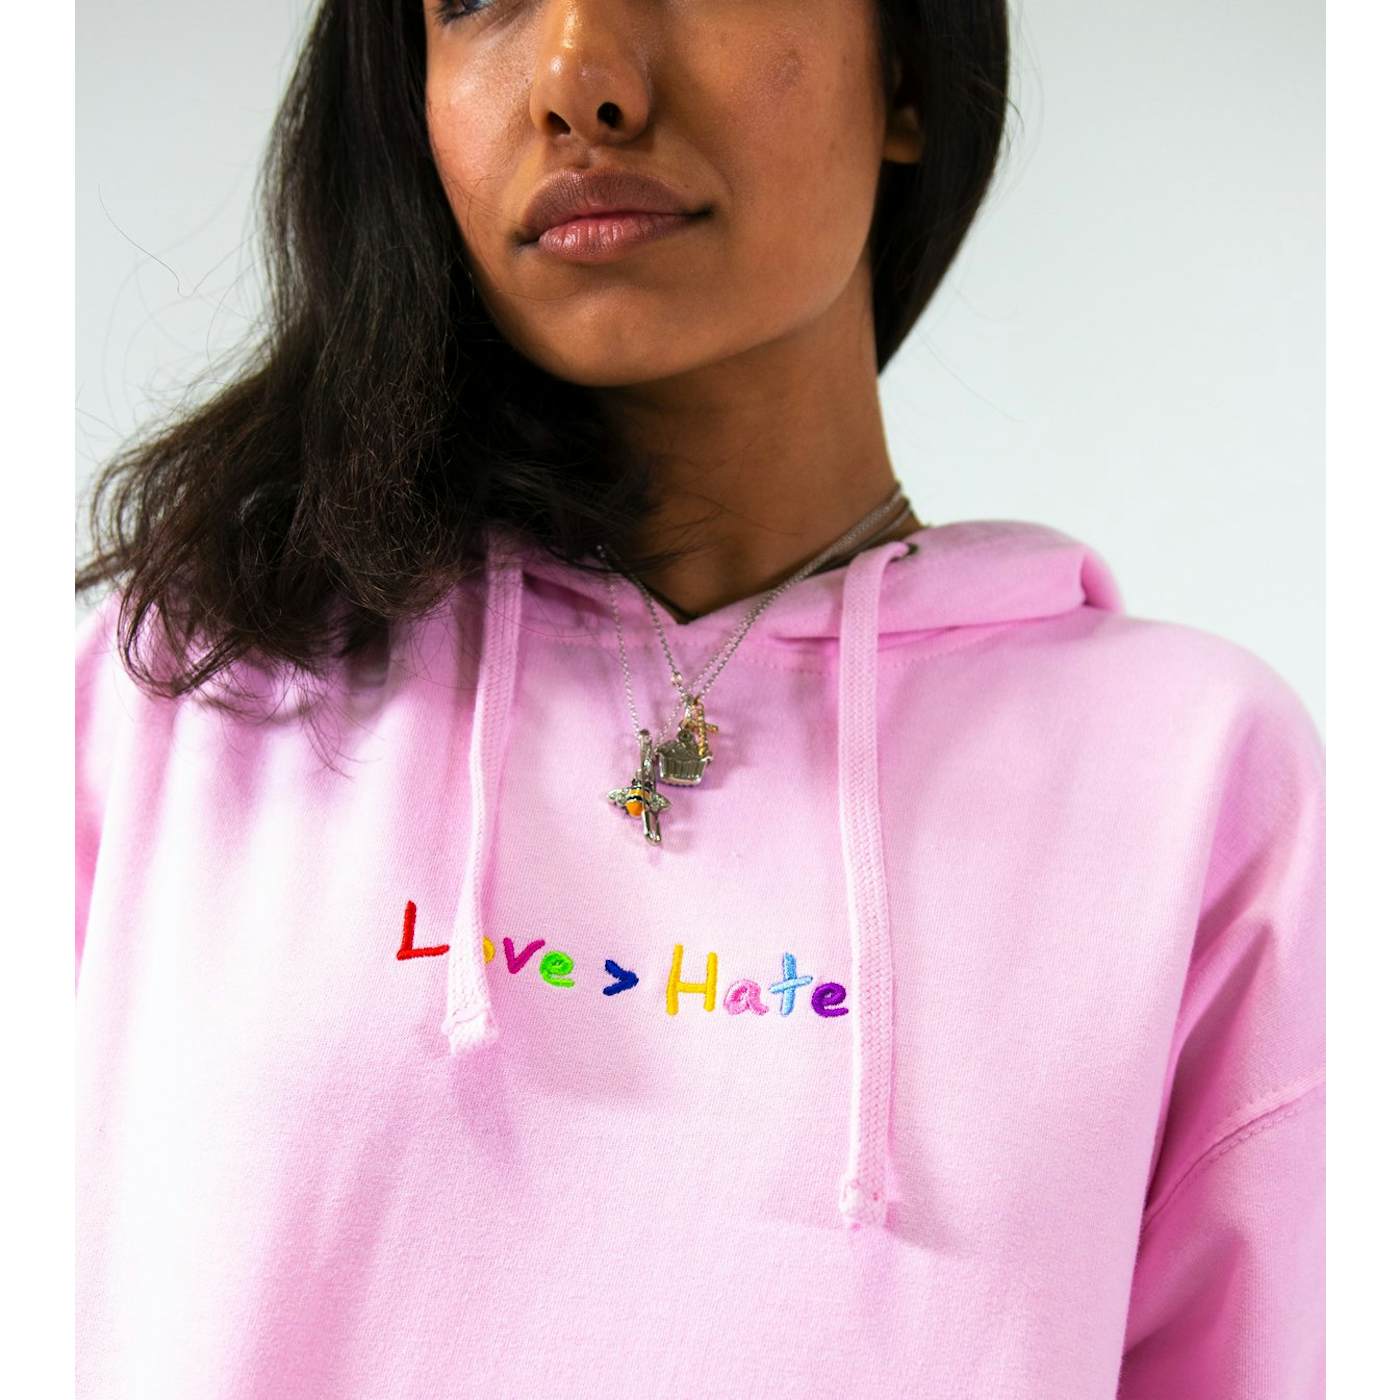 Roy Purdy Love > Hate Embroidered Light Pink Hoodie